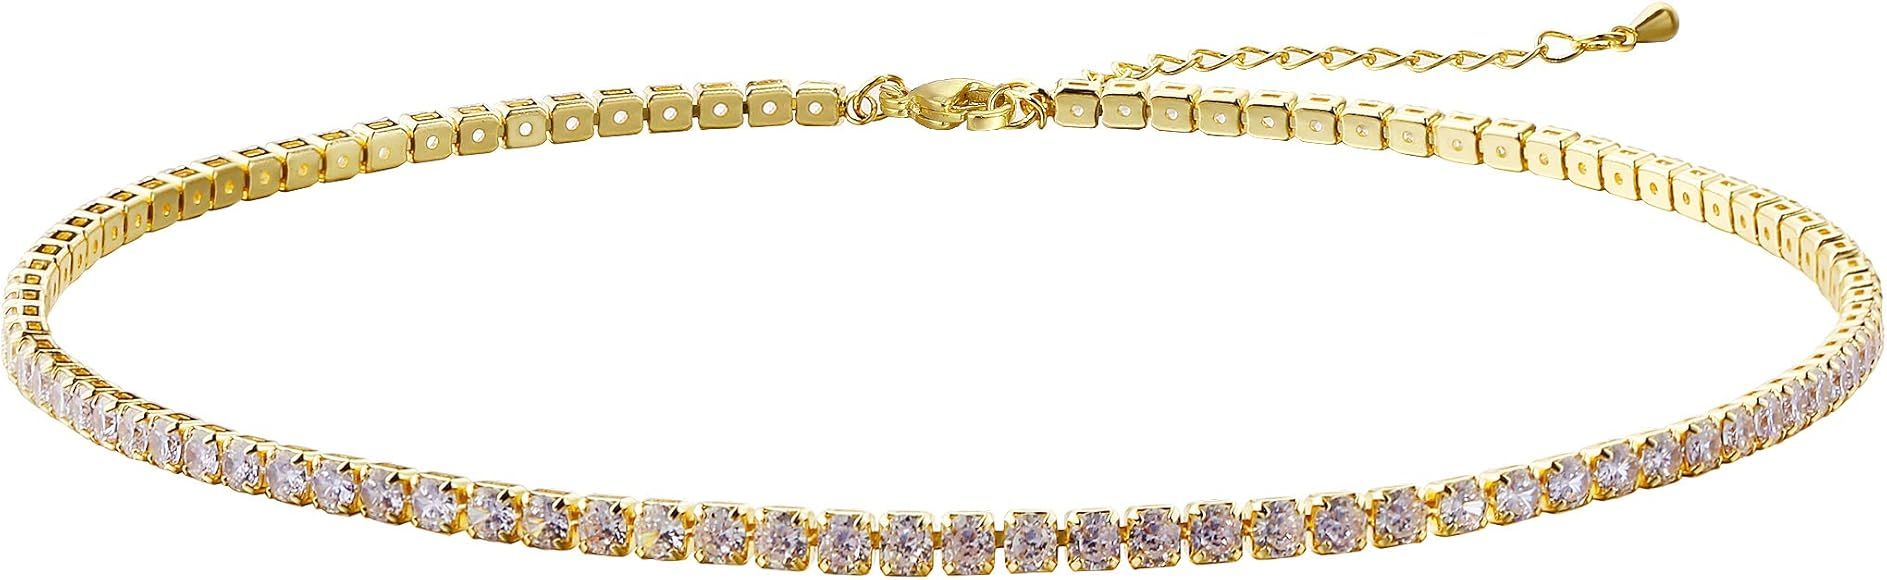 Tewiky Tennis Necklace 14K Gold Plated/Silver Sparking Rhinestone Choker Necklaces Dainty Crystal Cu | Amazon (US)